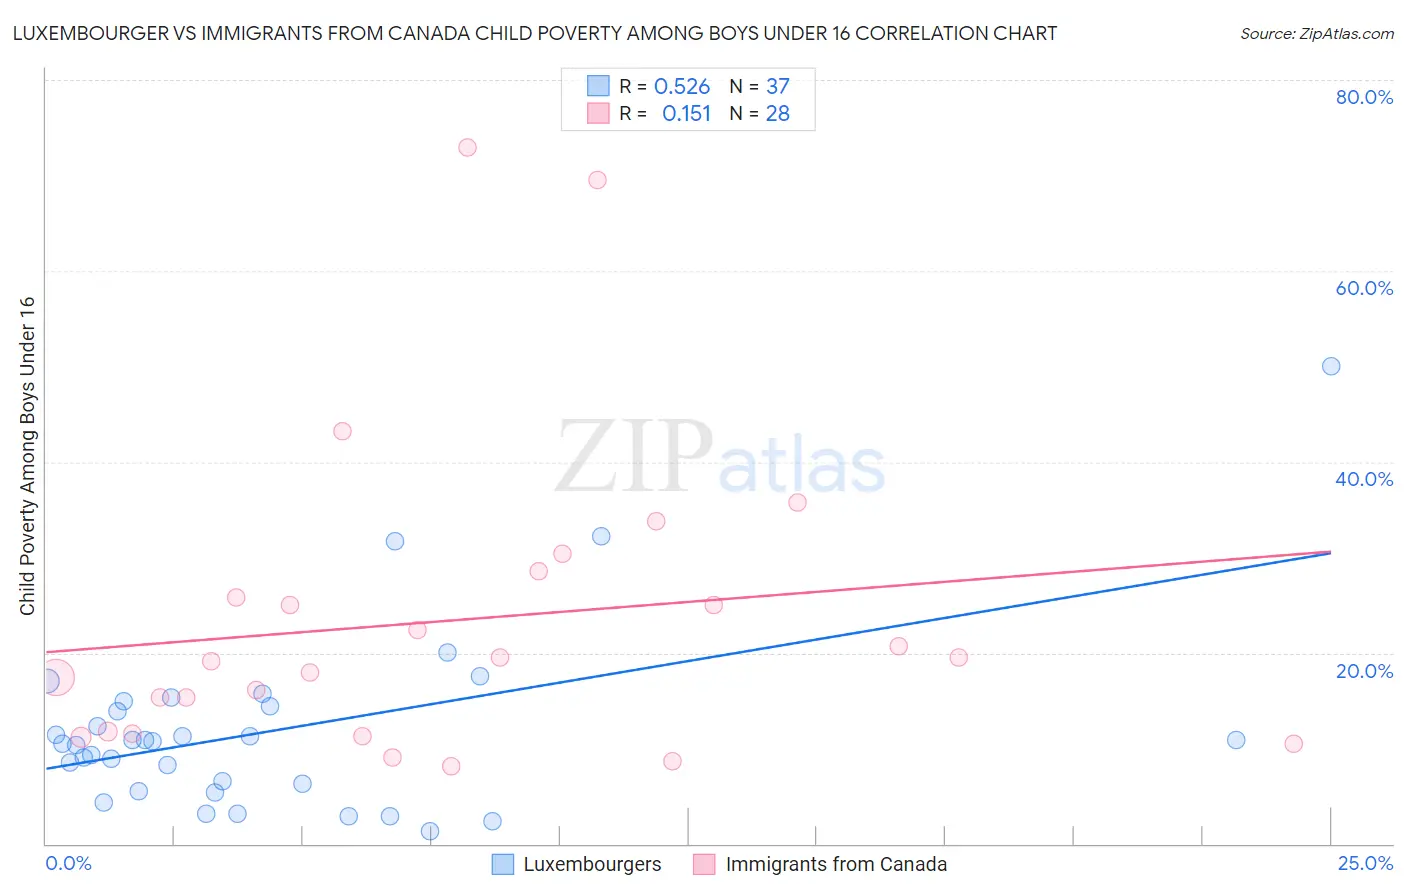 Luxembourger vs Immigrants from Canada Child Poverty Among Boys Under 16